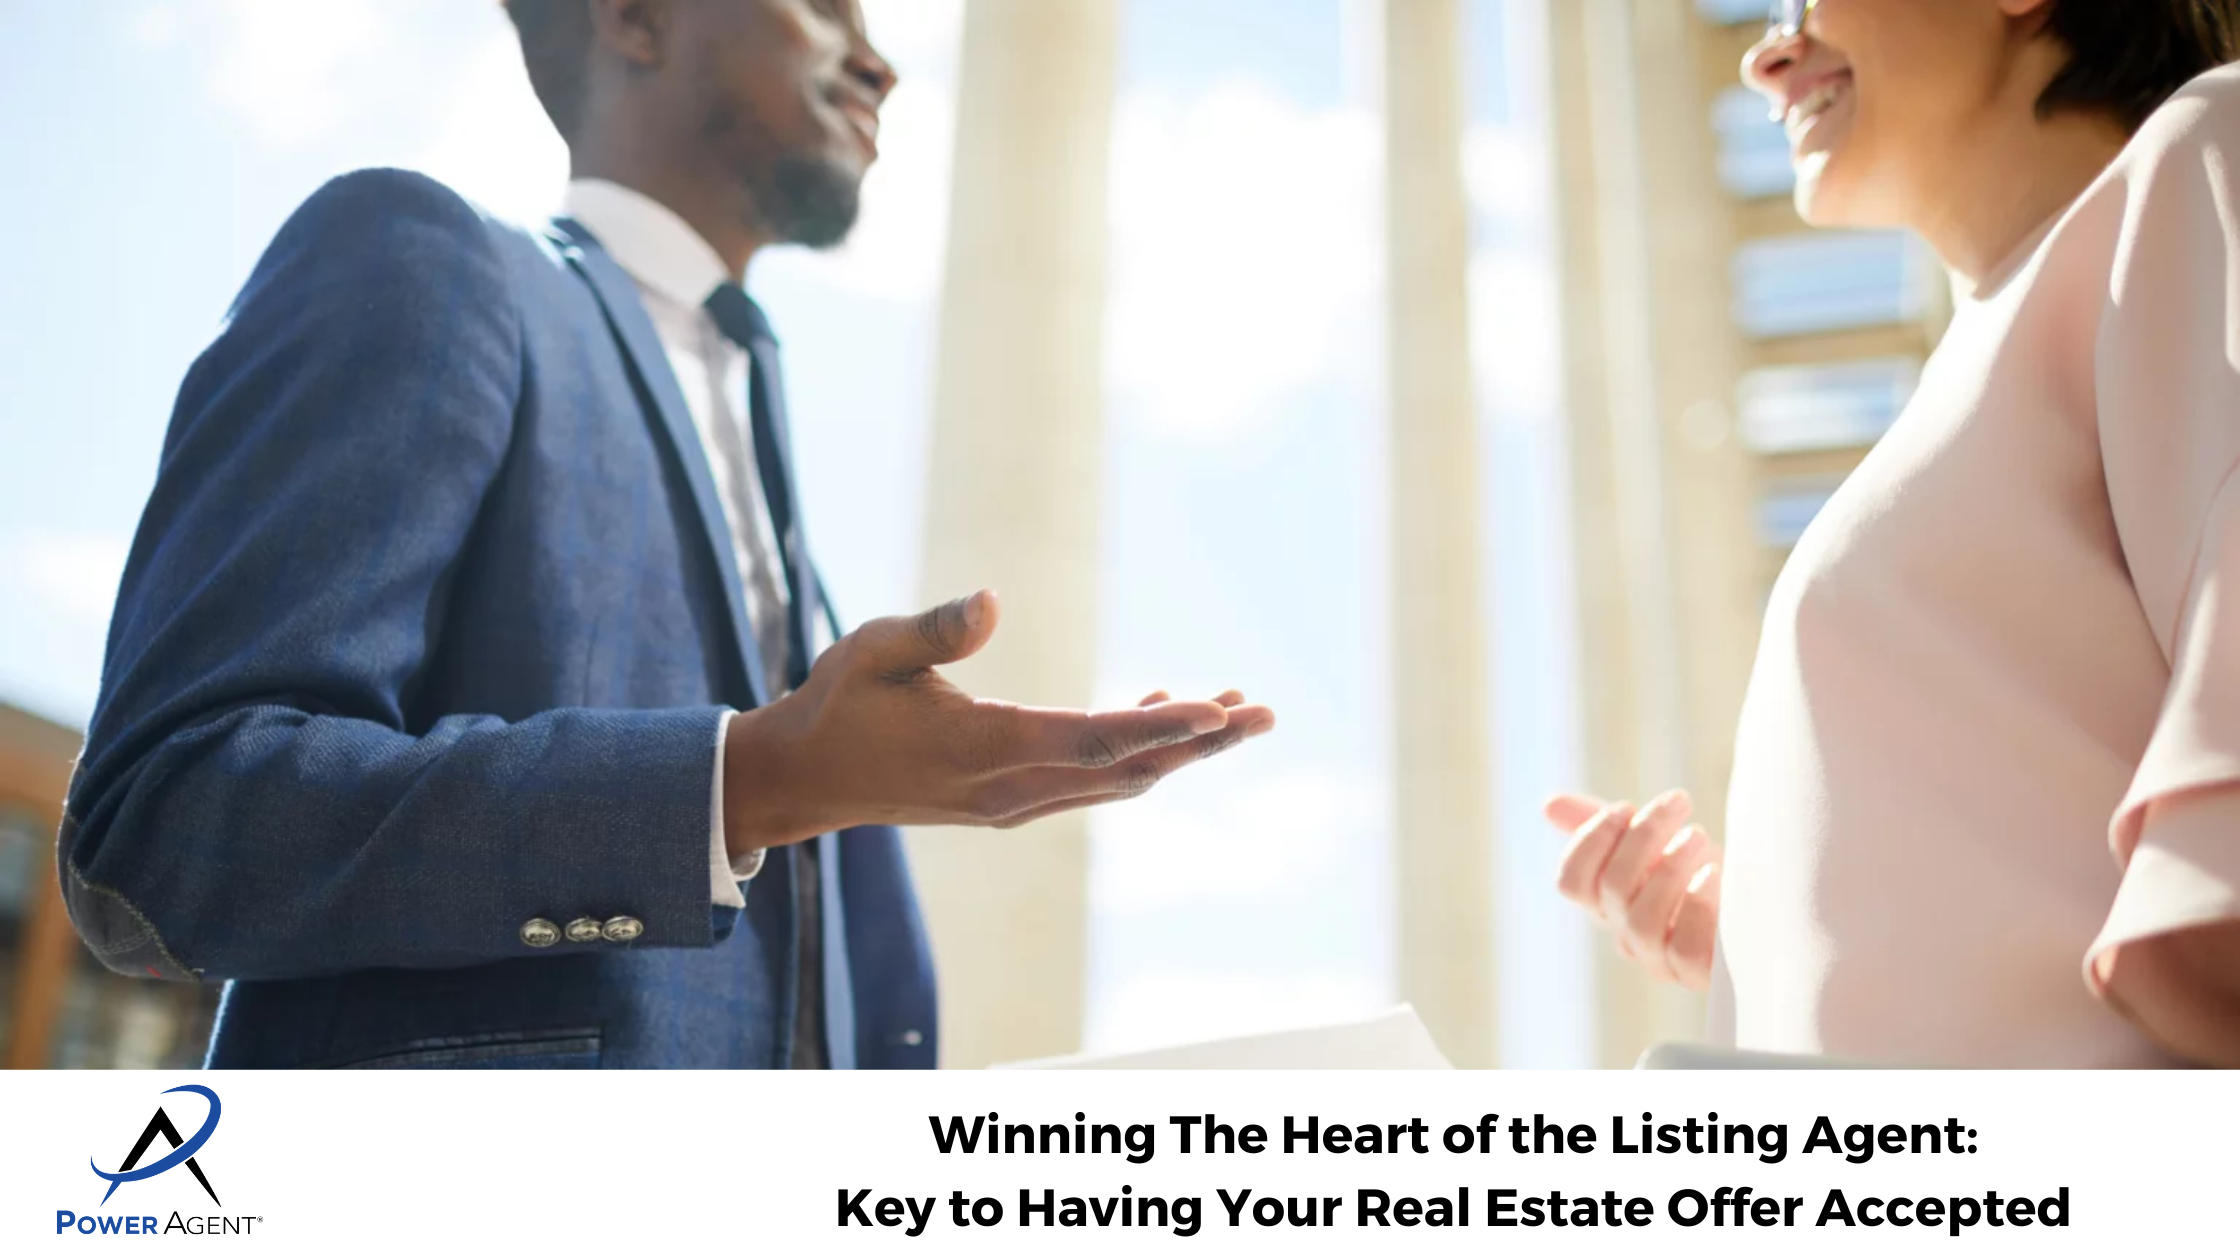 Winning The Heart of the Listing Agent: Key to Having Your Real Estate Offer Accepted